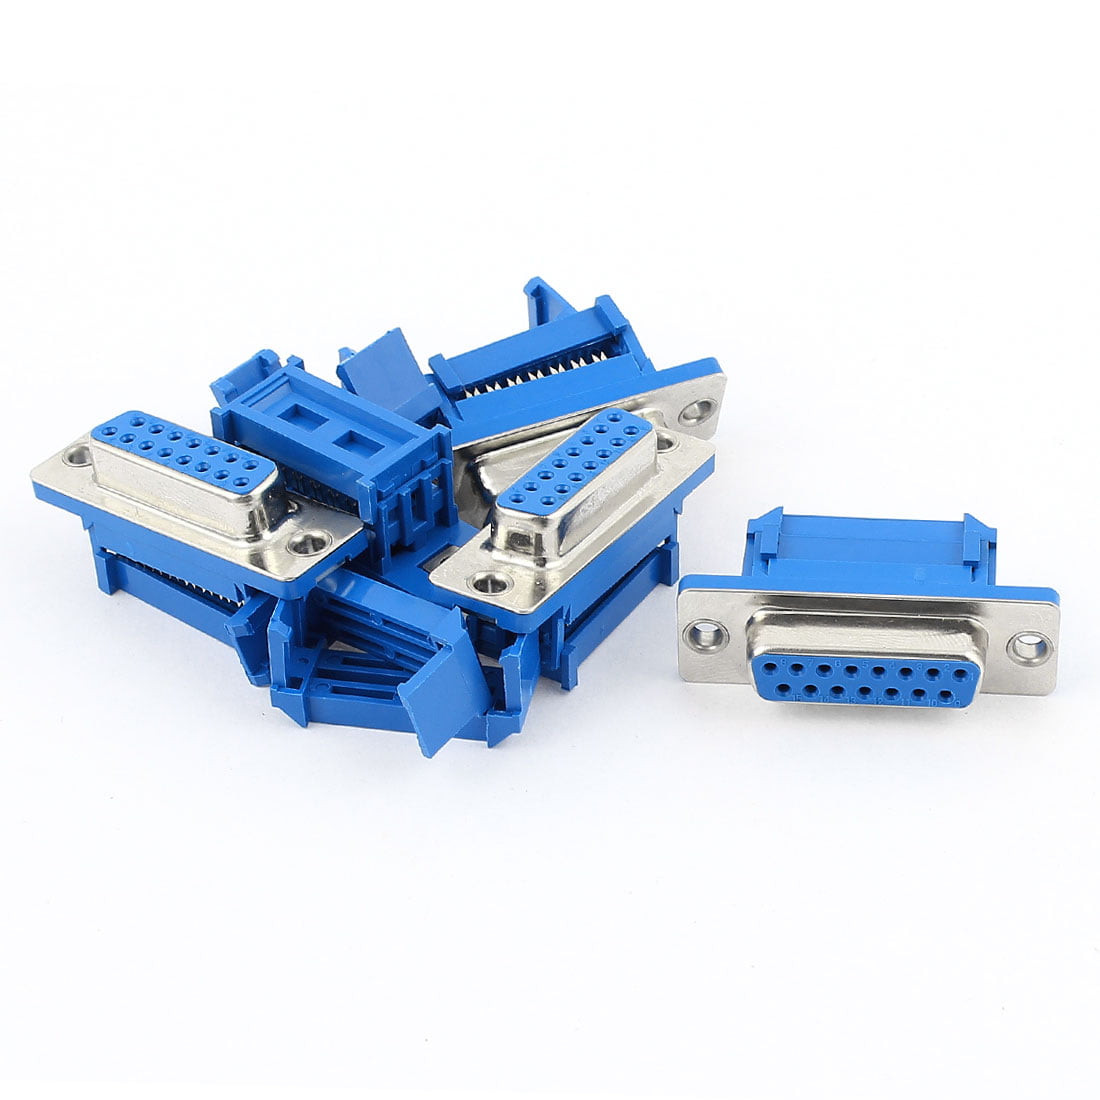 Willwin 10pcs D-SUB DB15 15 Pin Female IDC Type Crimp Connector for Flat Cable 